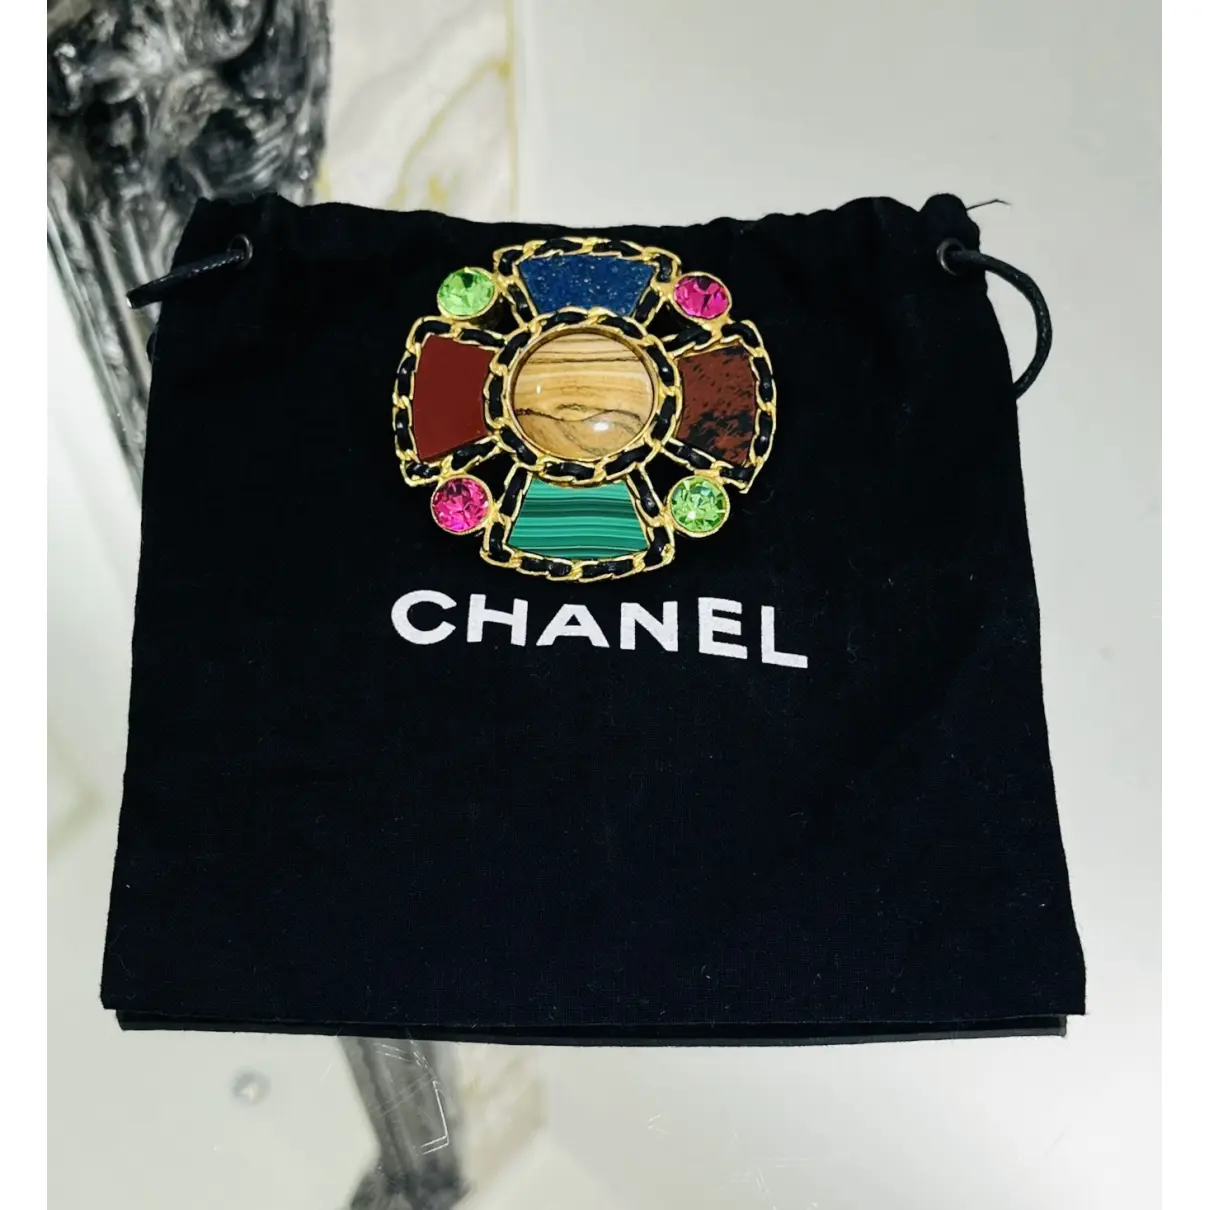 Buy Chanel Pin & brooche online - Vintage